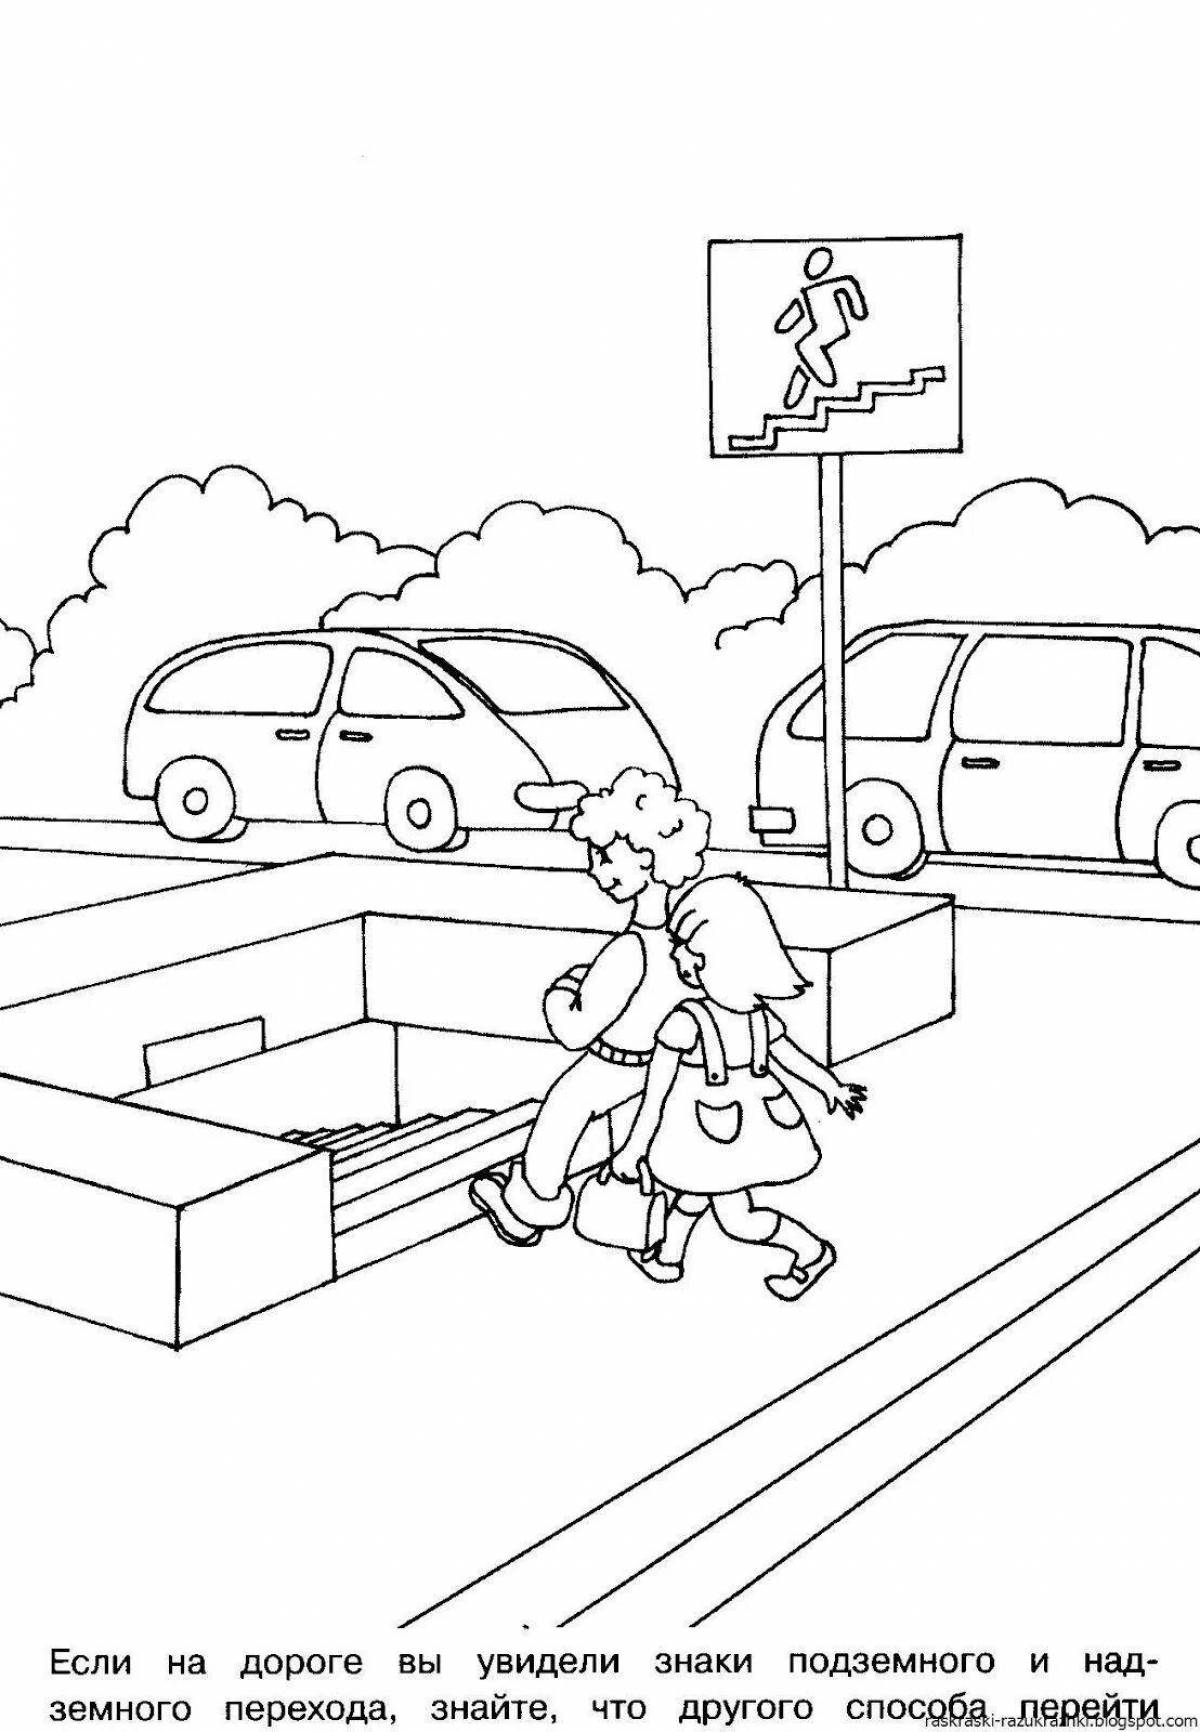 Attractive traffic safety page for toddlers